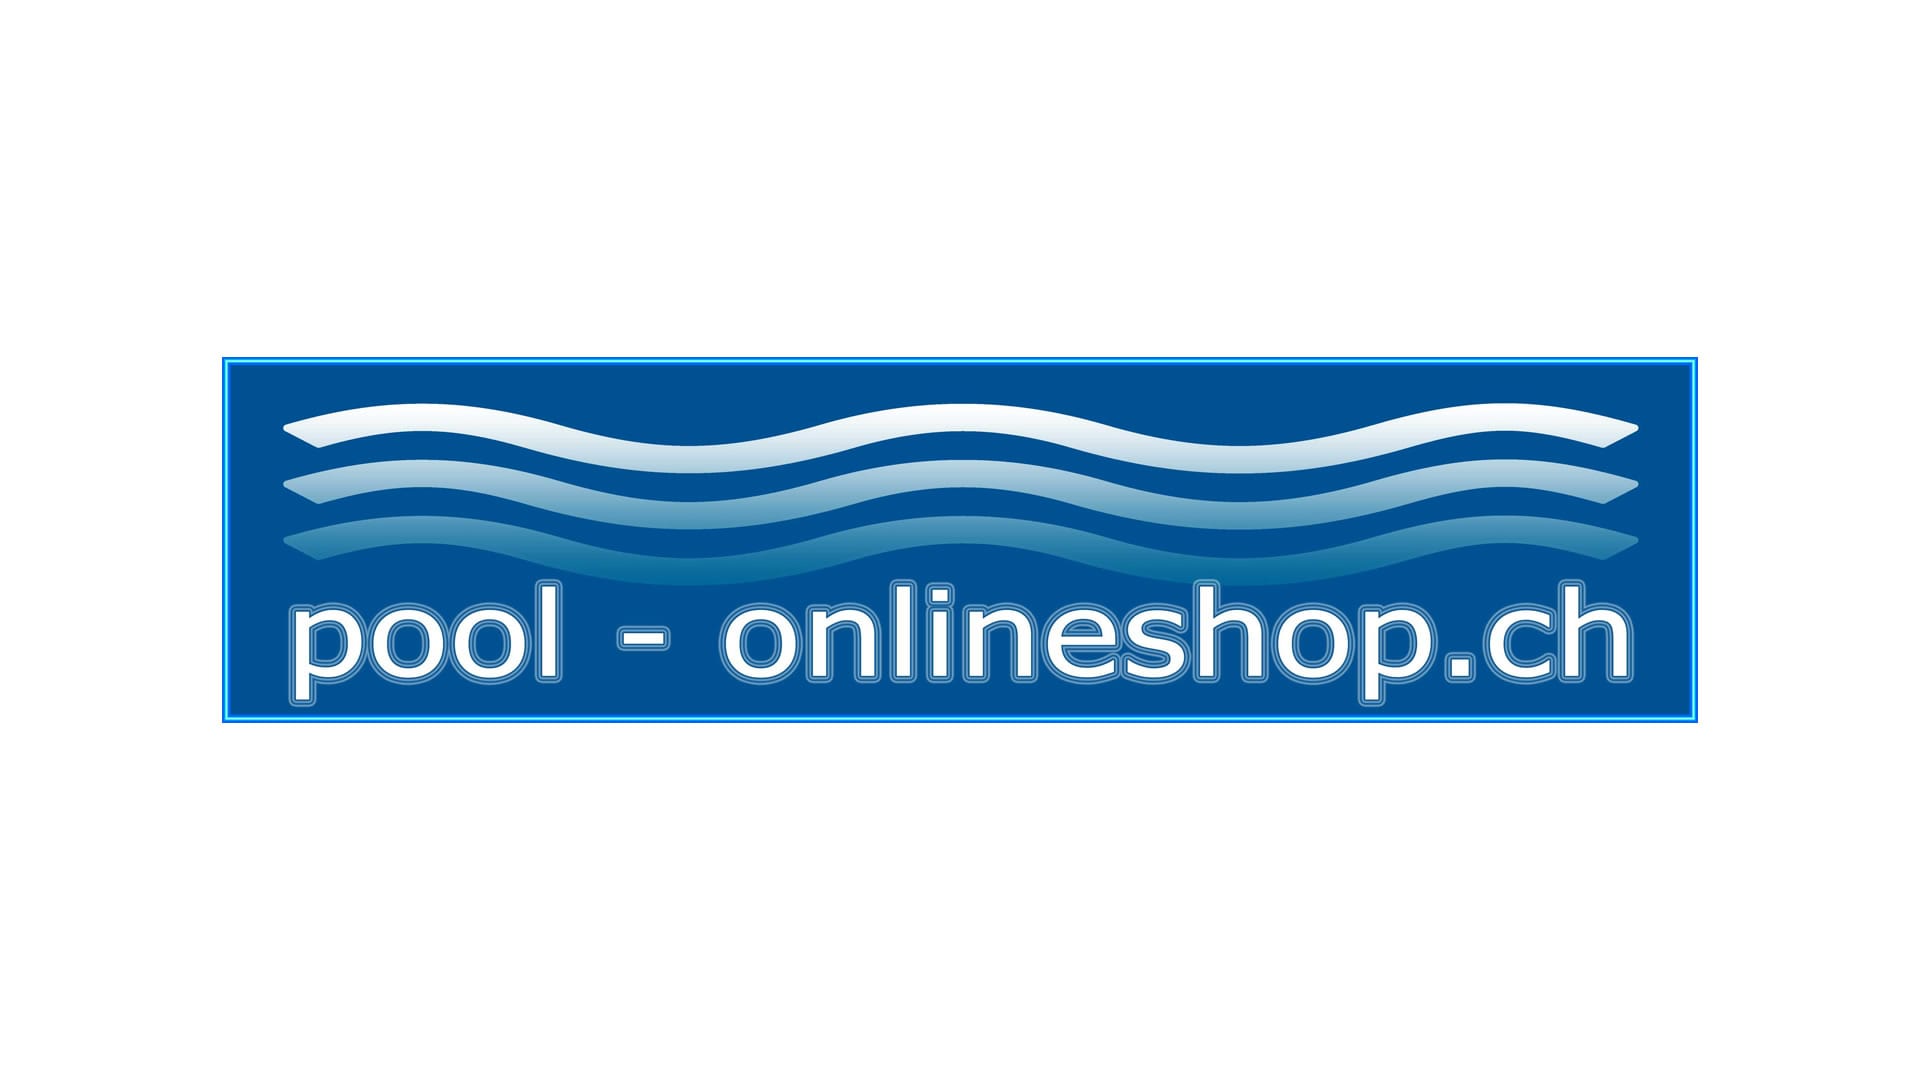 Links pool-onlineshop.ch